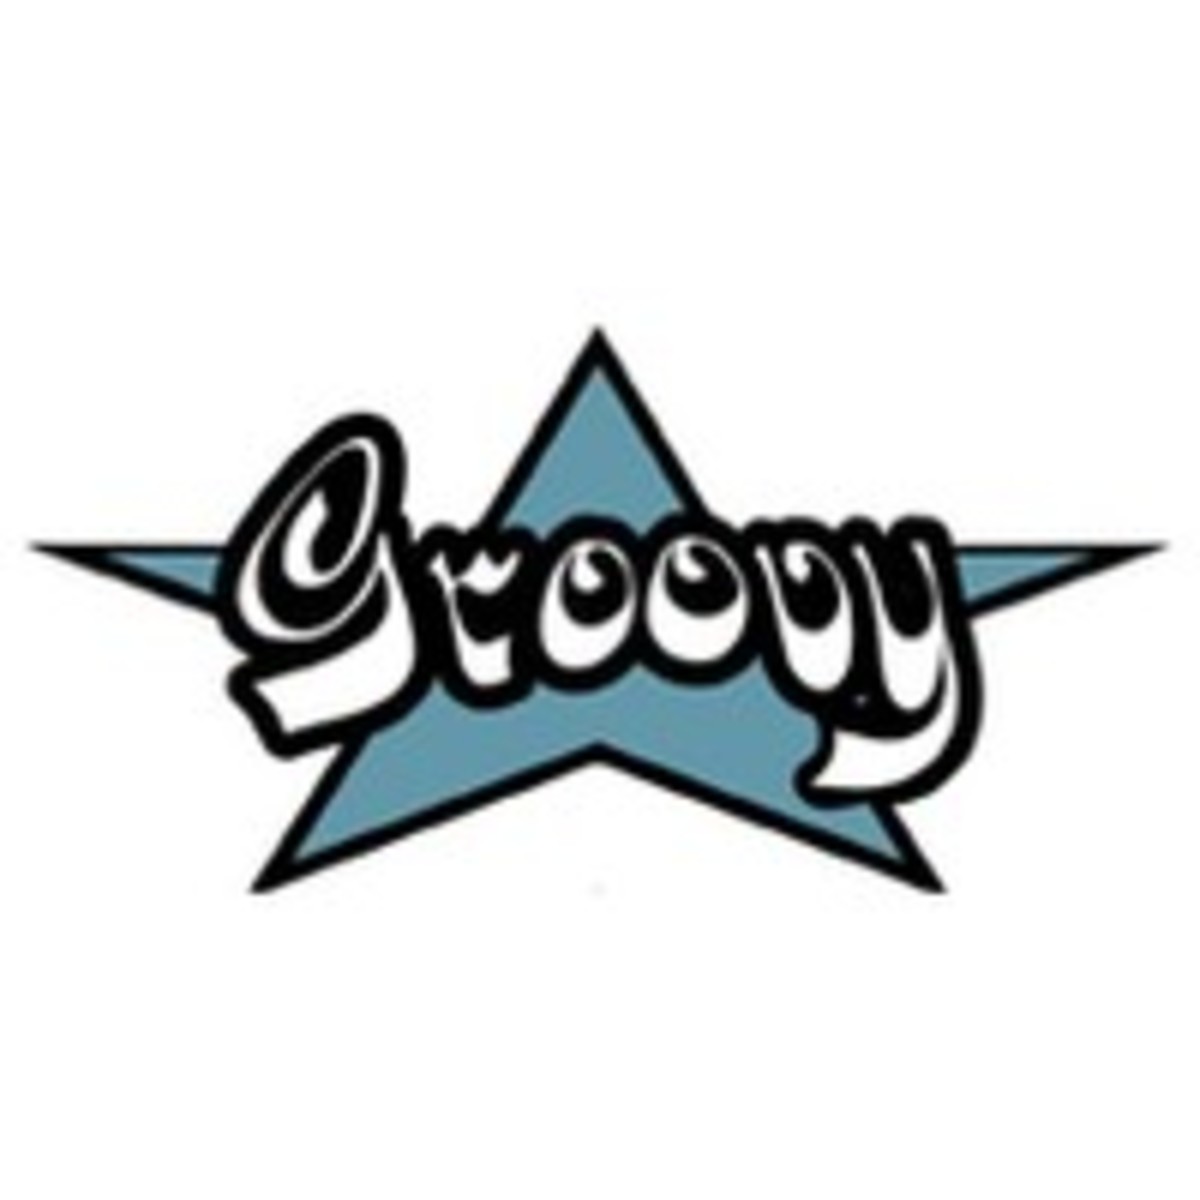 Groovy is a Java virtual machine (JVM) language that helps automate scripting.